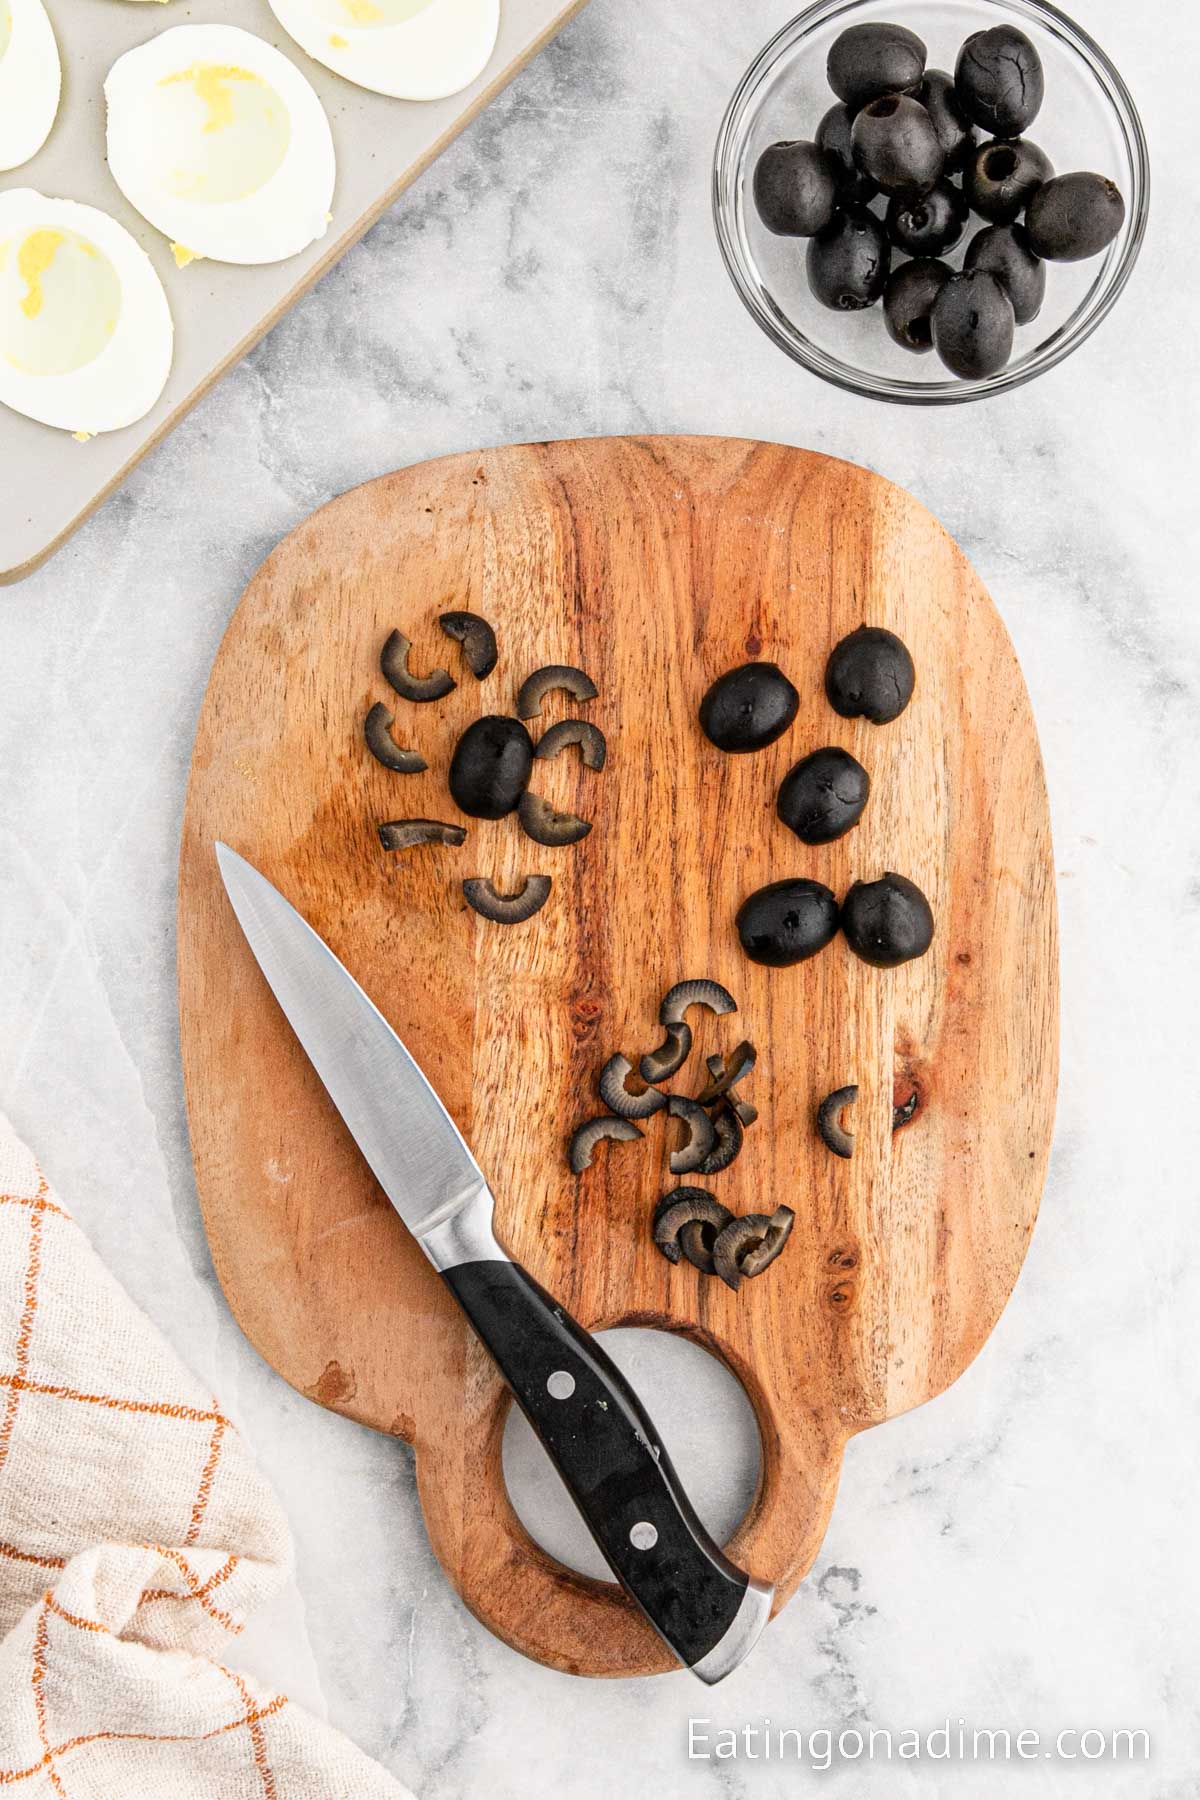 Slicing the back olives on a cutting board